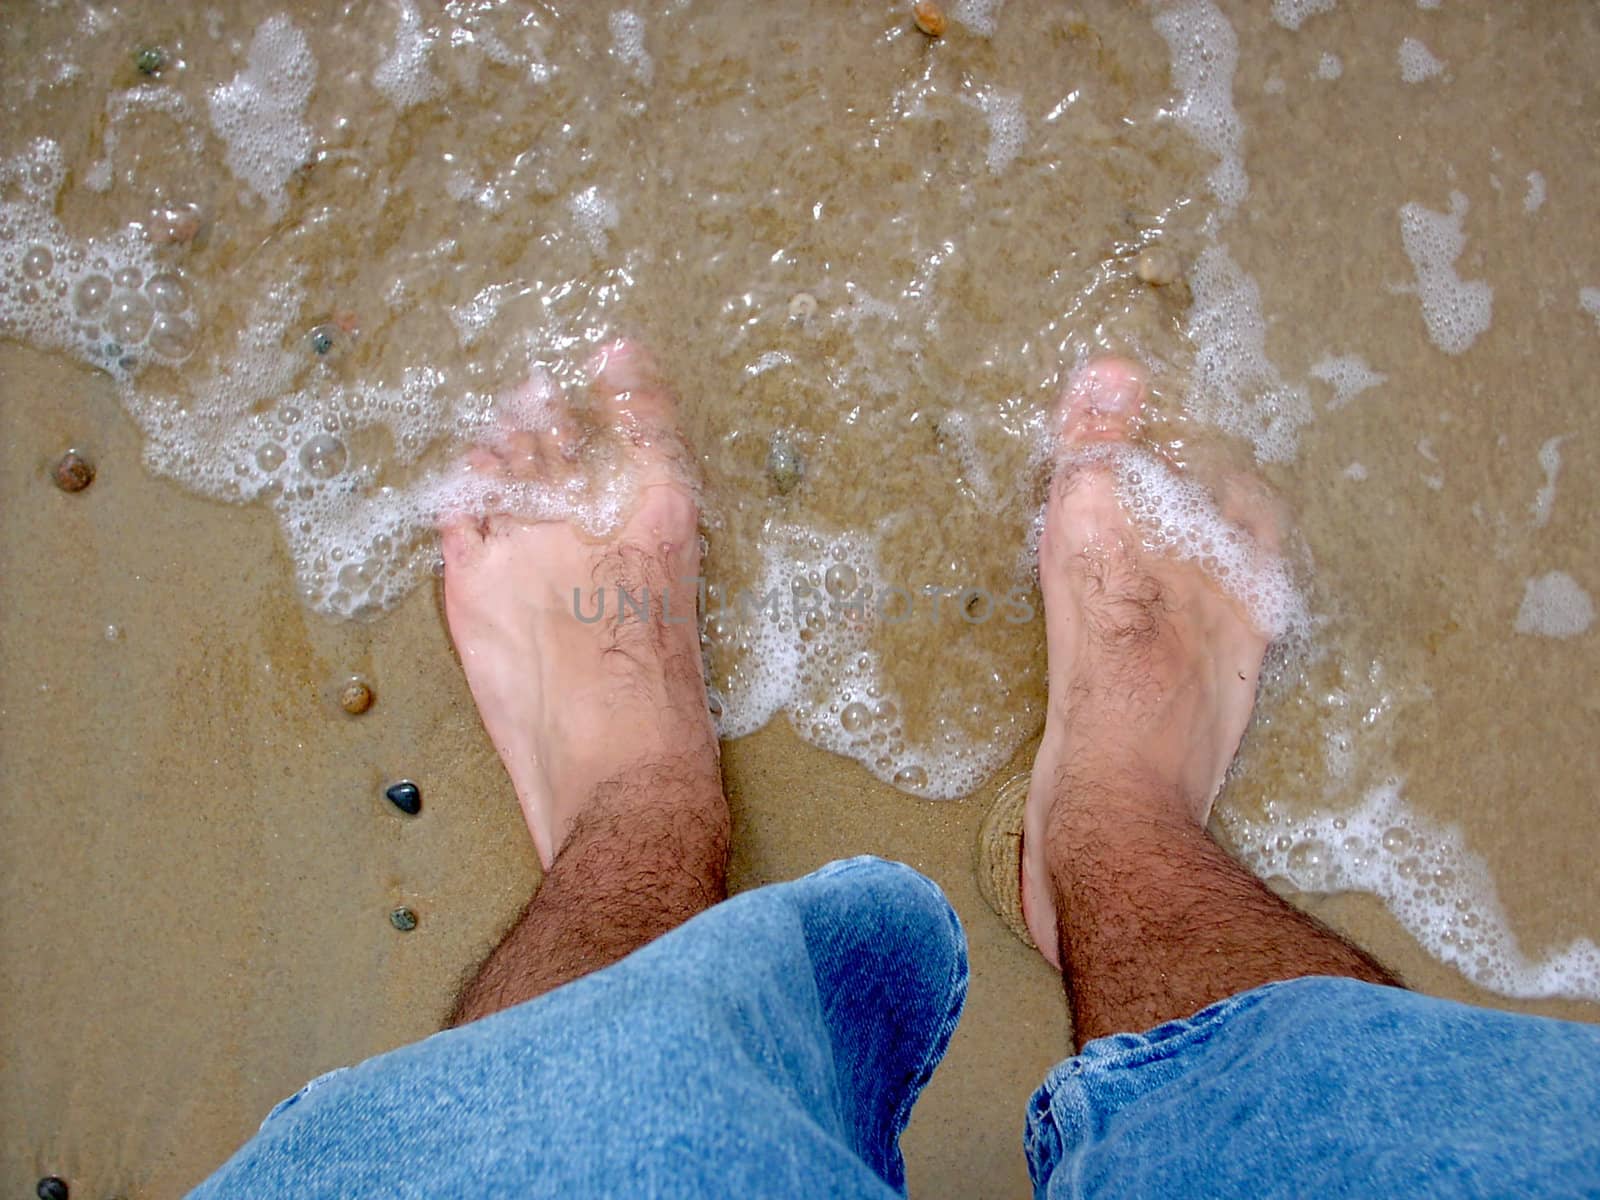 The ocean is washing ashore on my piggie toes.
